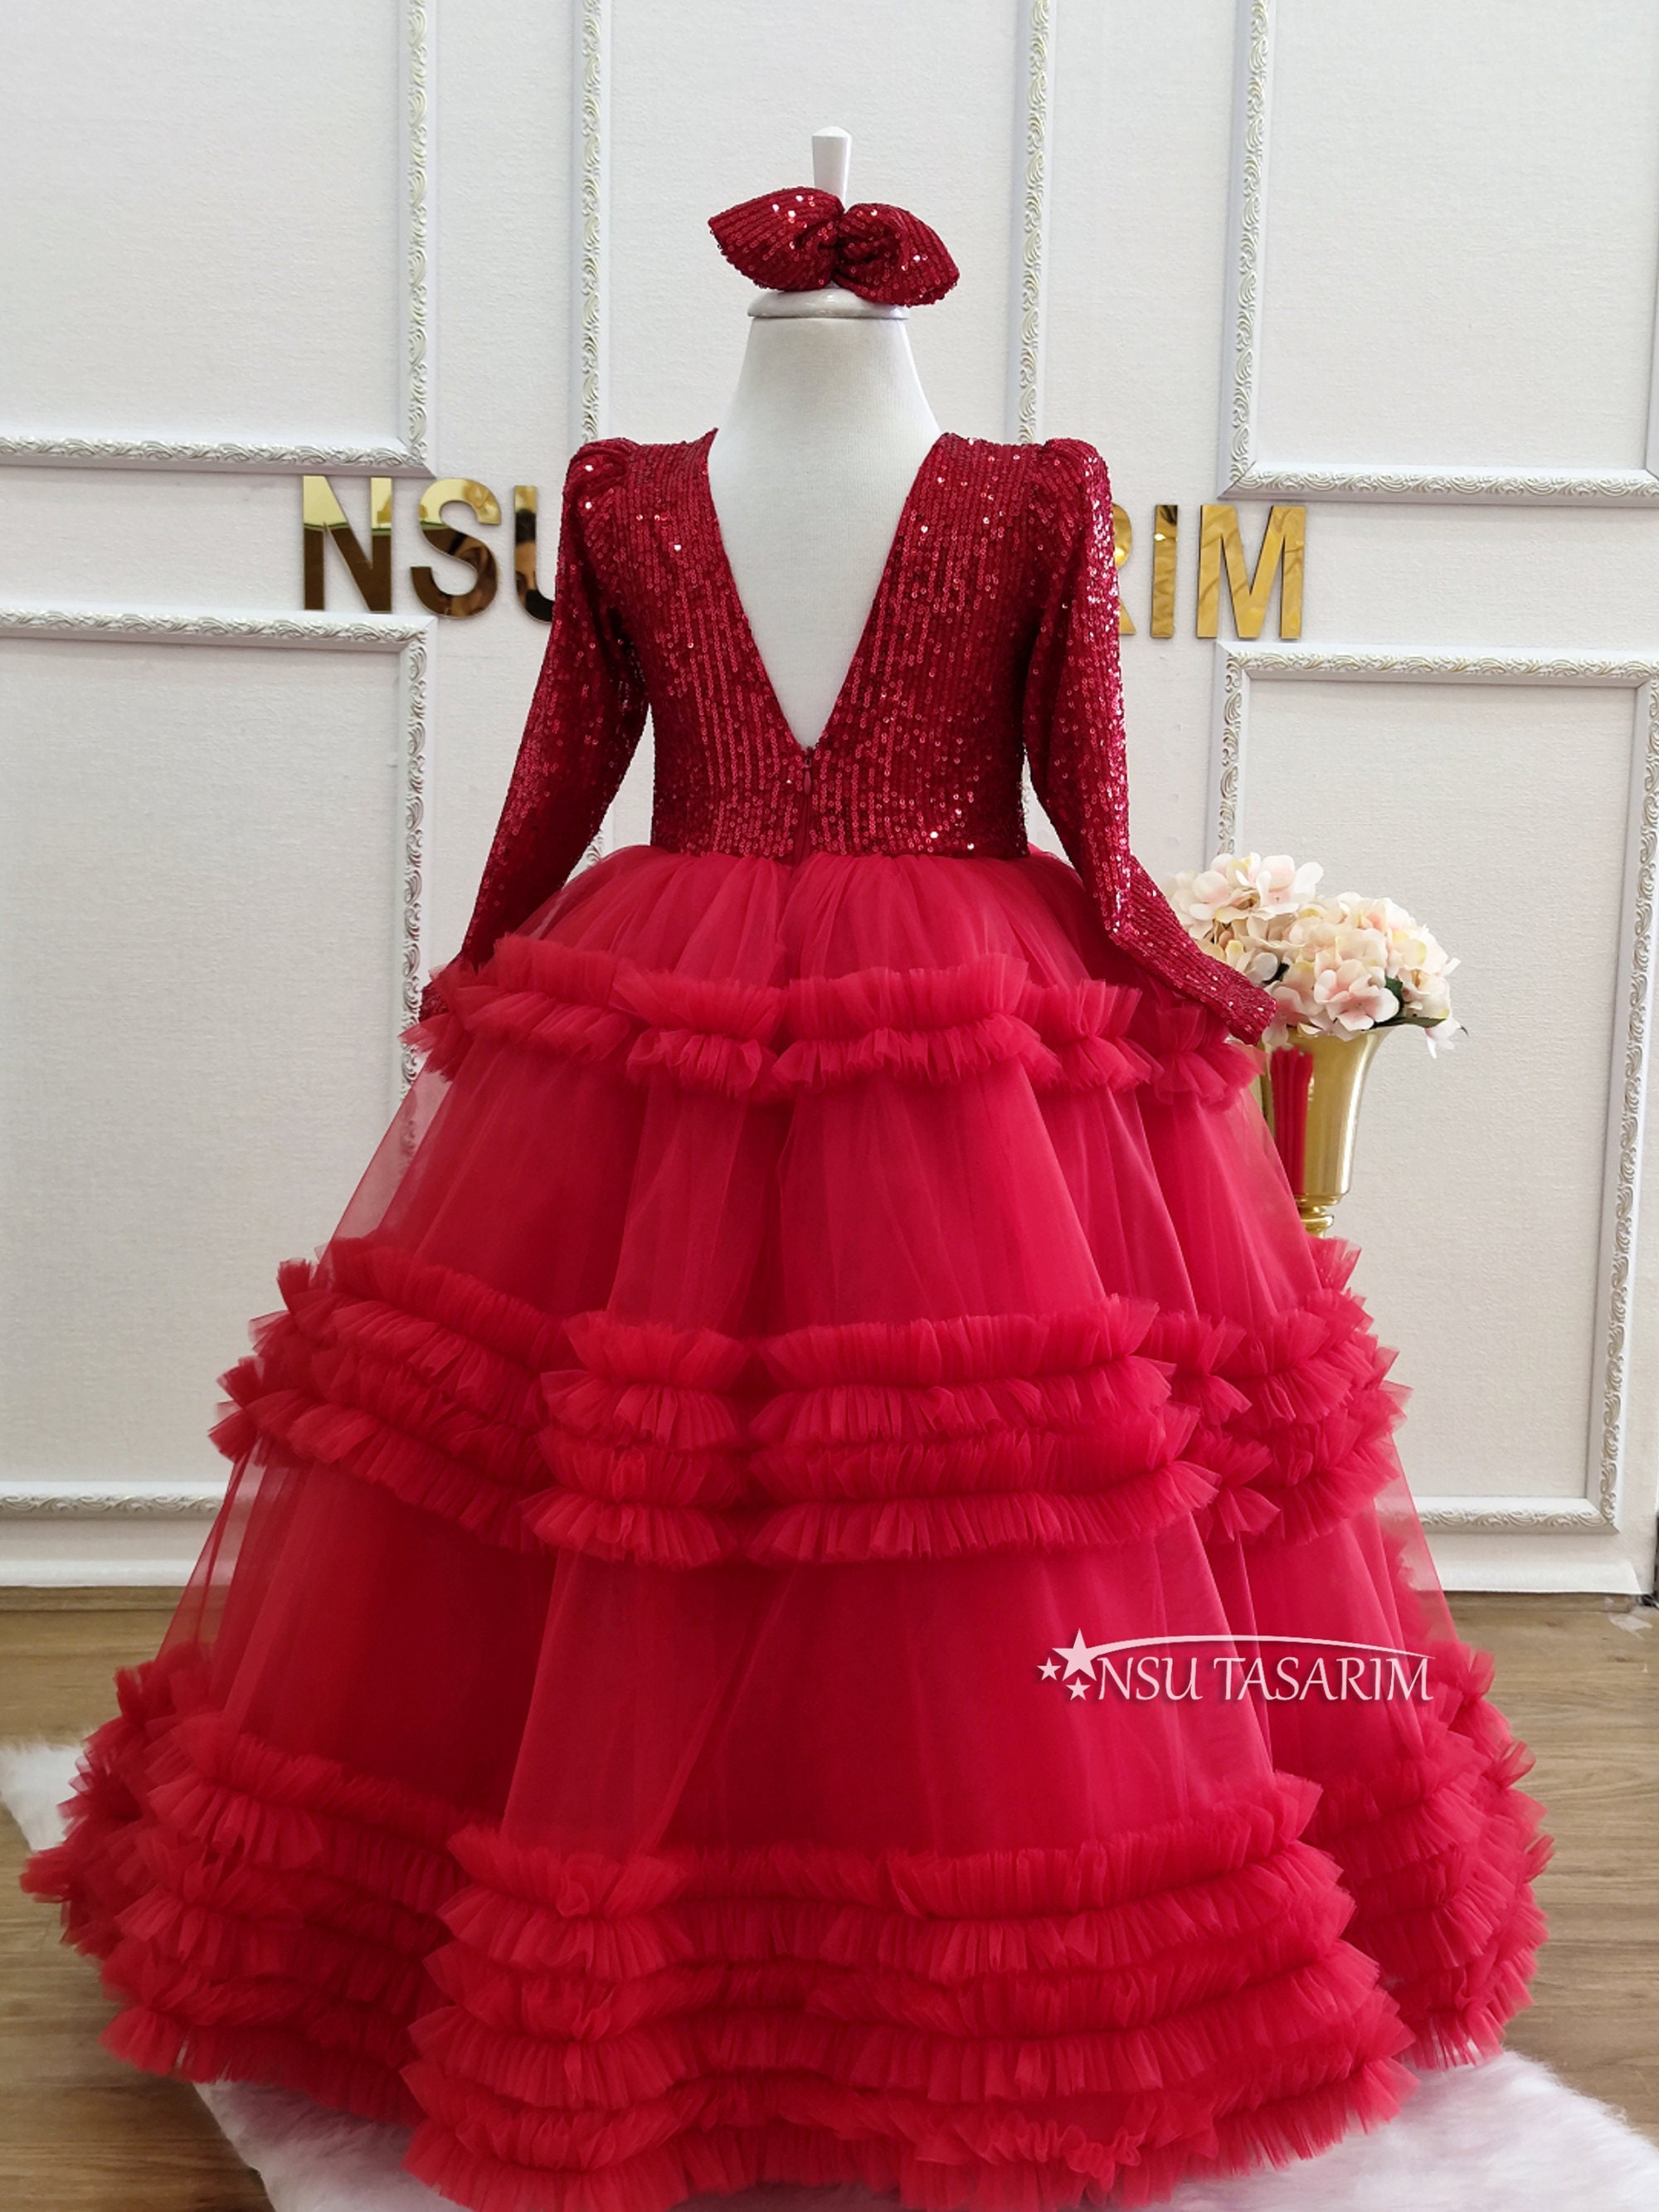 EINCcm Ball Gown Dresses for Girls, Lace Bowknot Princess Dresses Birthday  Party Wedding Gown Kids Dresses for Toddler Kids Baby Girl, Pink,4-5 Years  - Walmart.com